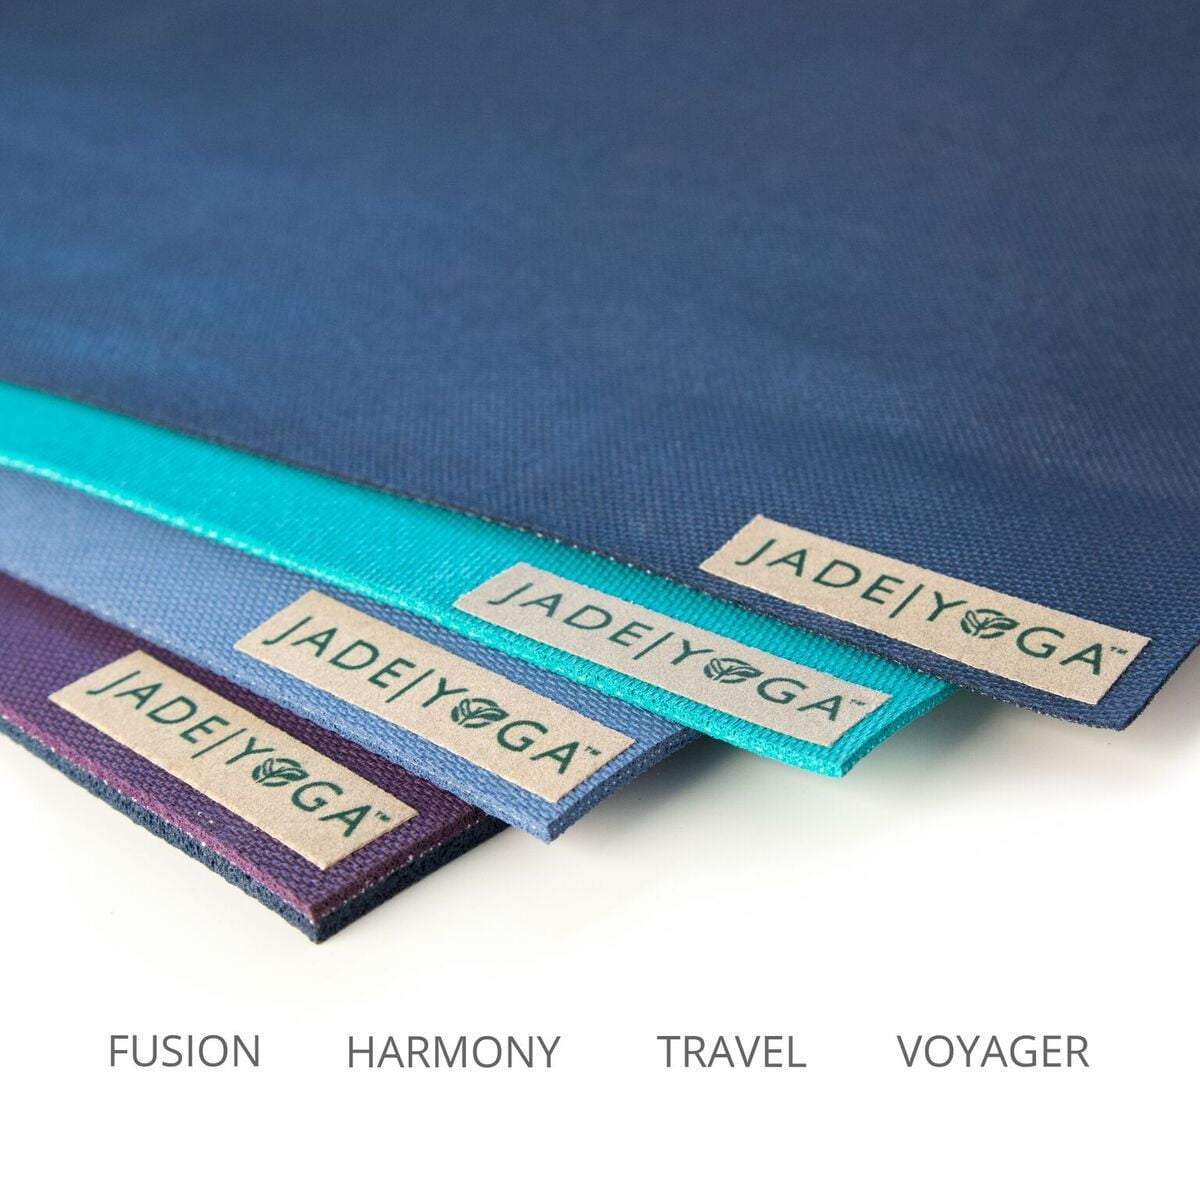 Jade Yoga mats - It's a good day to get your favourite Jade Harmony Yoga  Mat in kiwi or electric blue! find them here